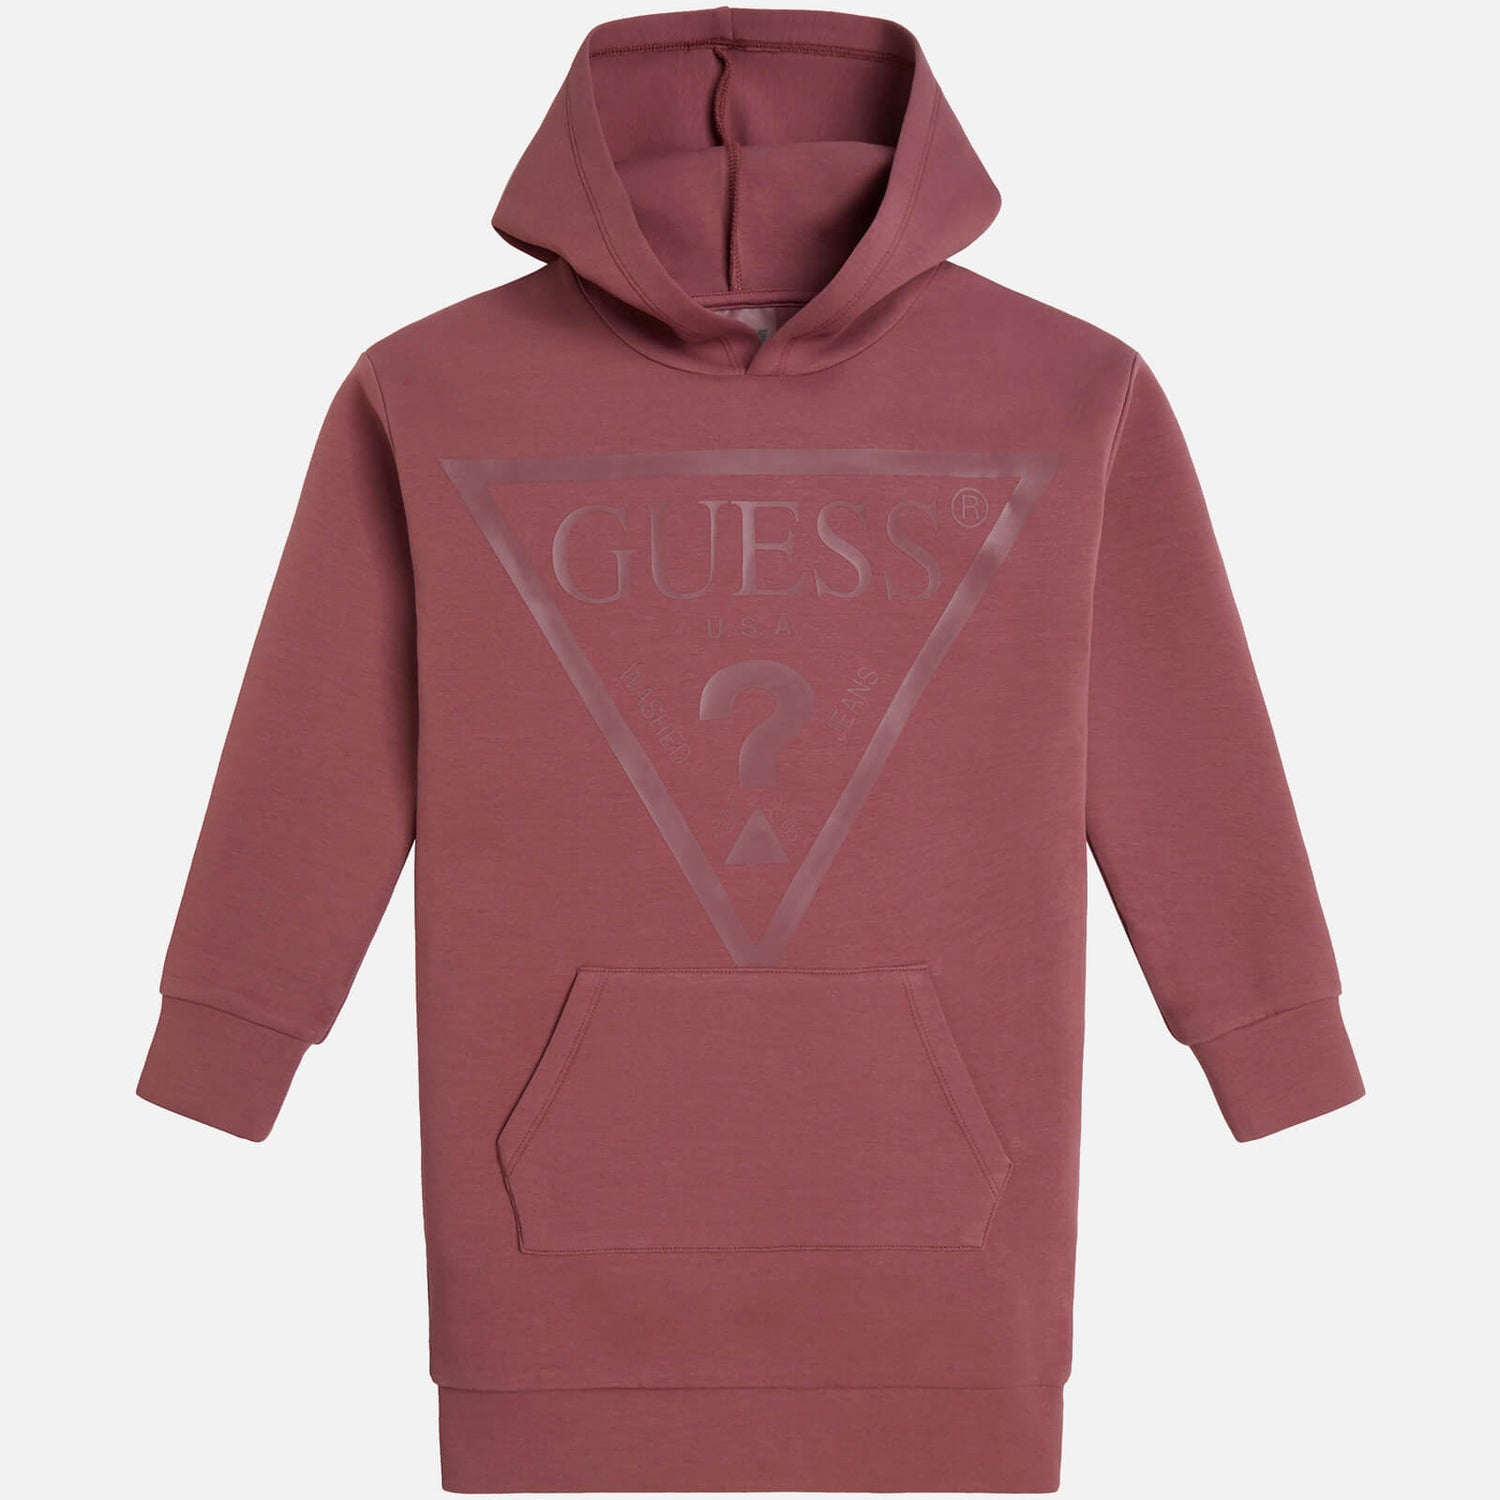 Guess Girls' Logo-Printed Cotton-Blend Hooded Dress - 12 Years